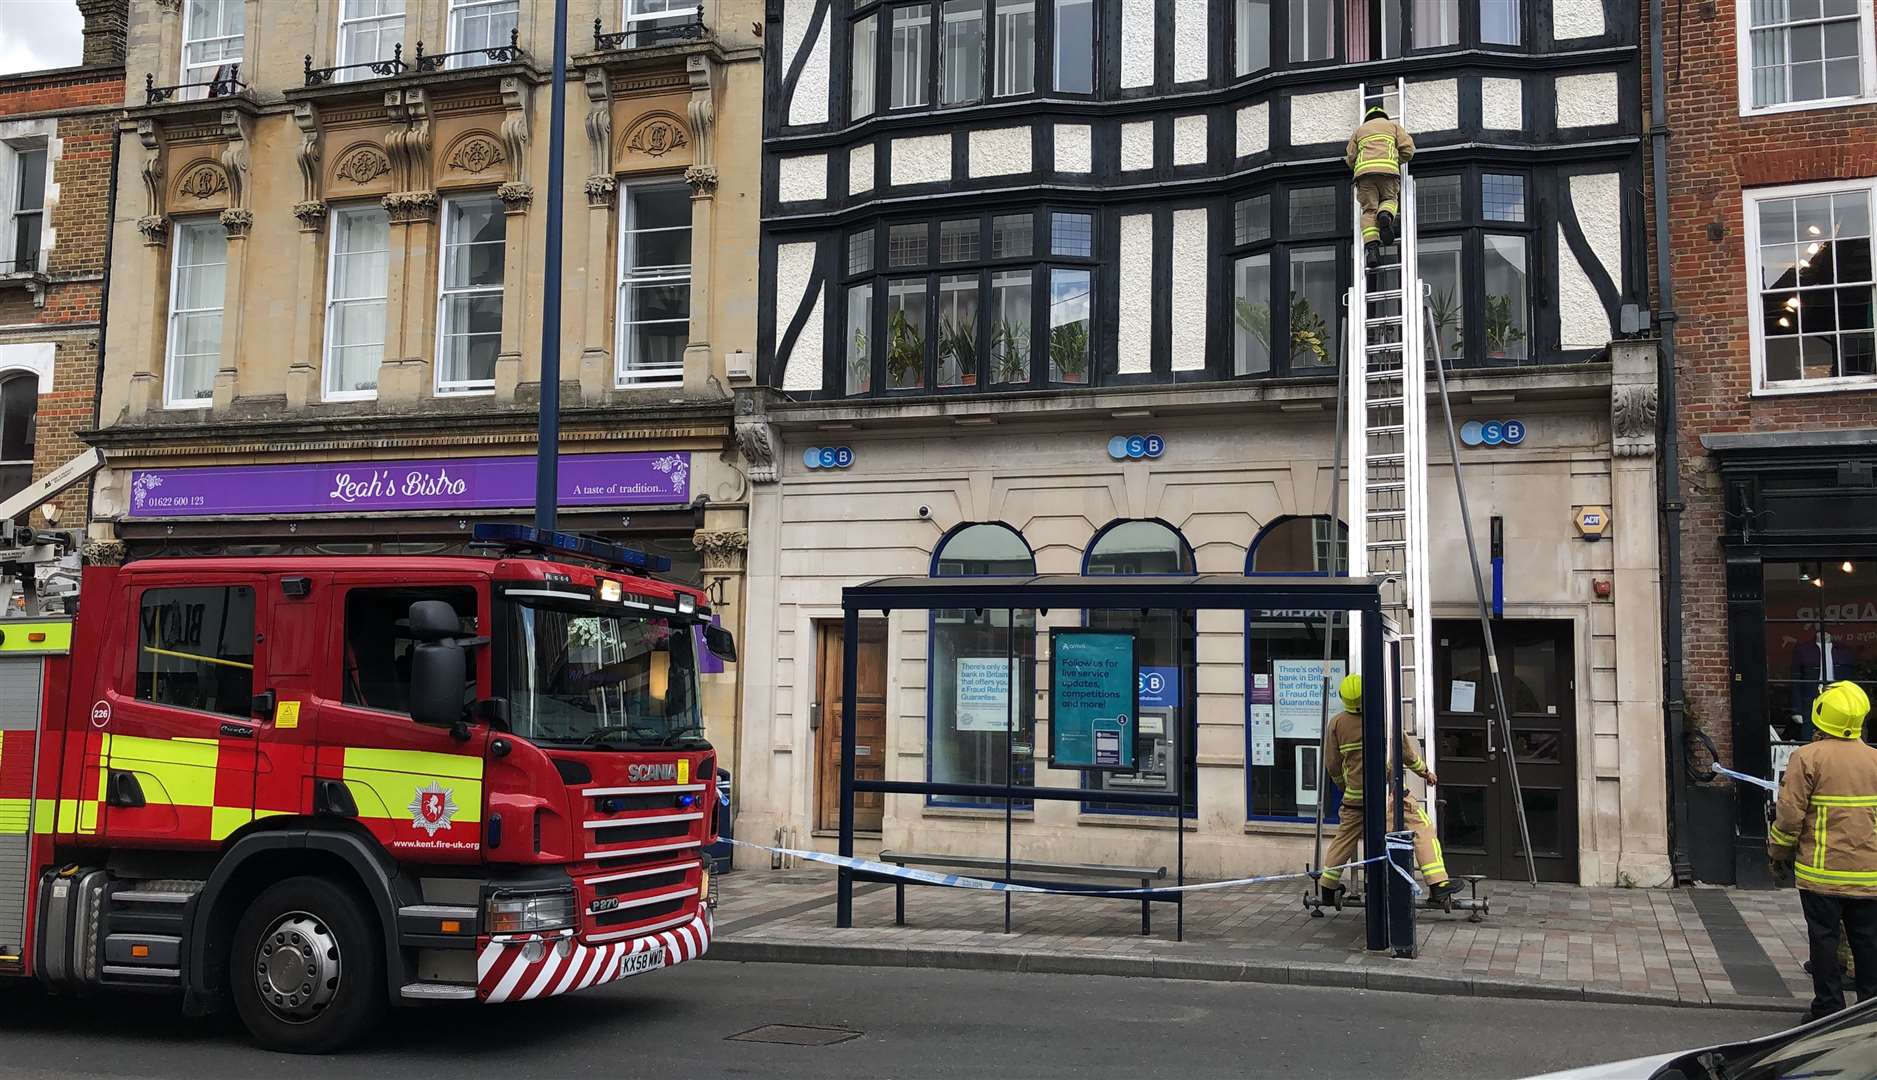 Firefighters were obliged to check the safety of the building after a window pane fell out in July 2019